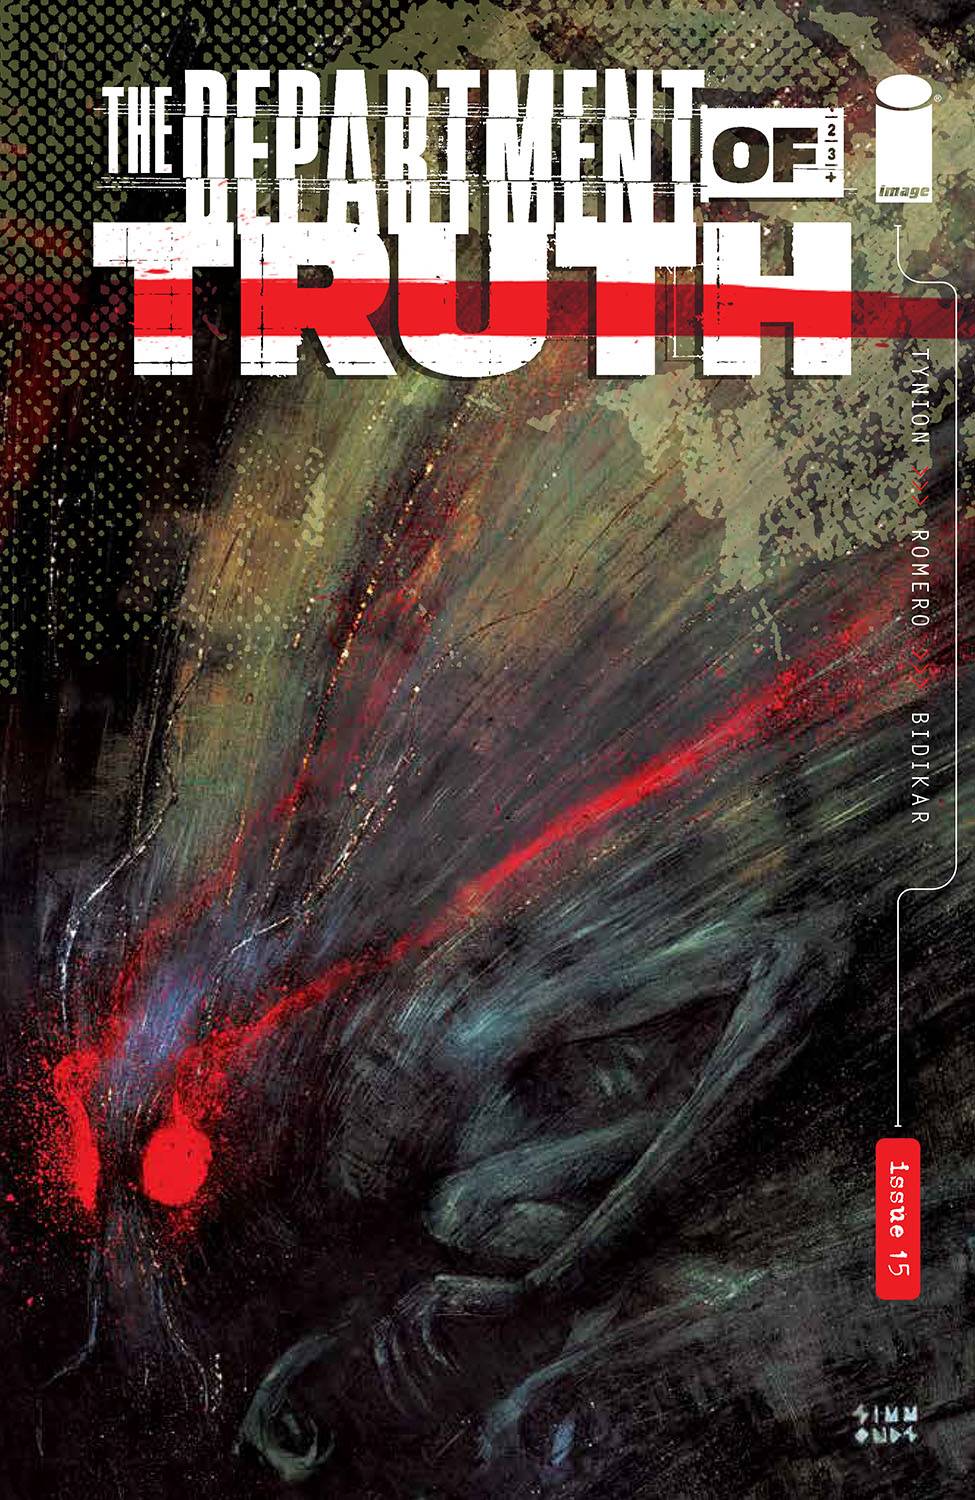 Photo of Department of Truth Issue 15 CVR A Simmonds (MR) comic sold by Stronghold Collectibles